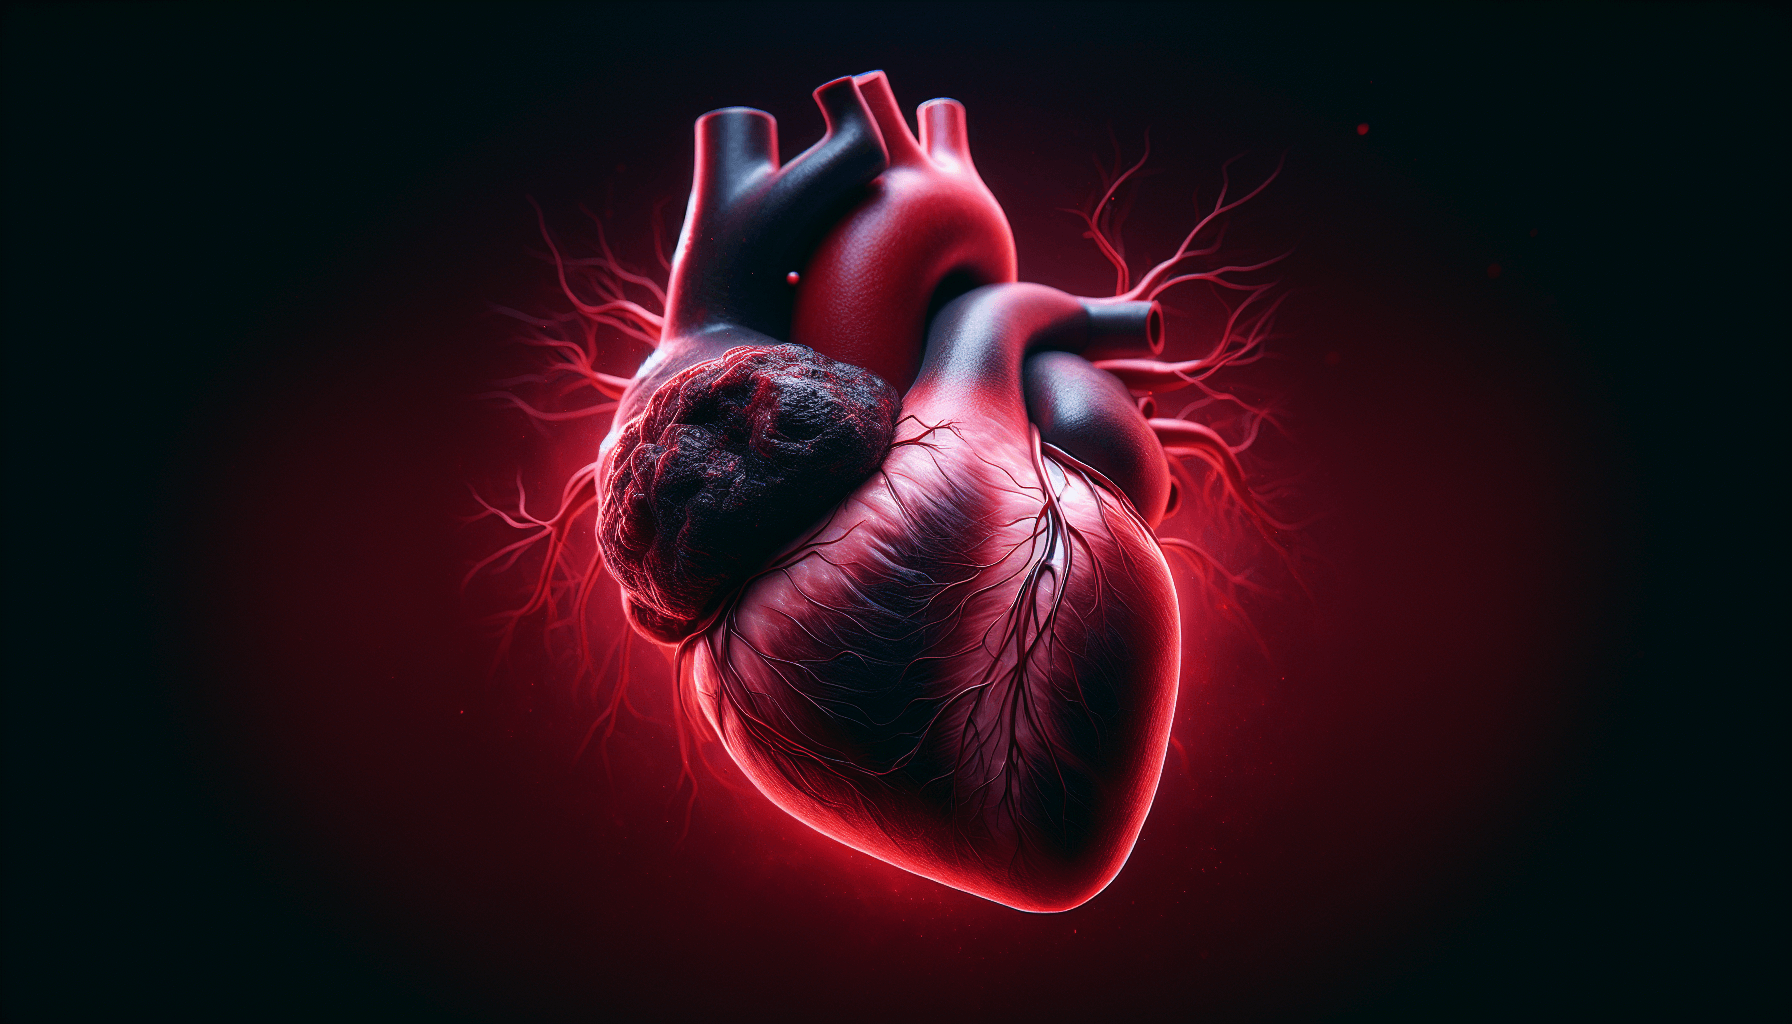 Illustration of heart and blood clot